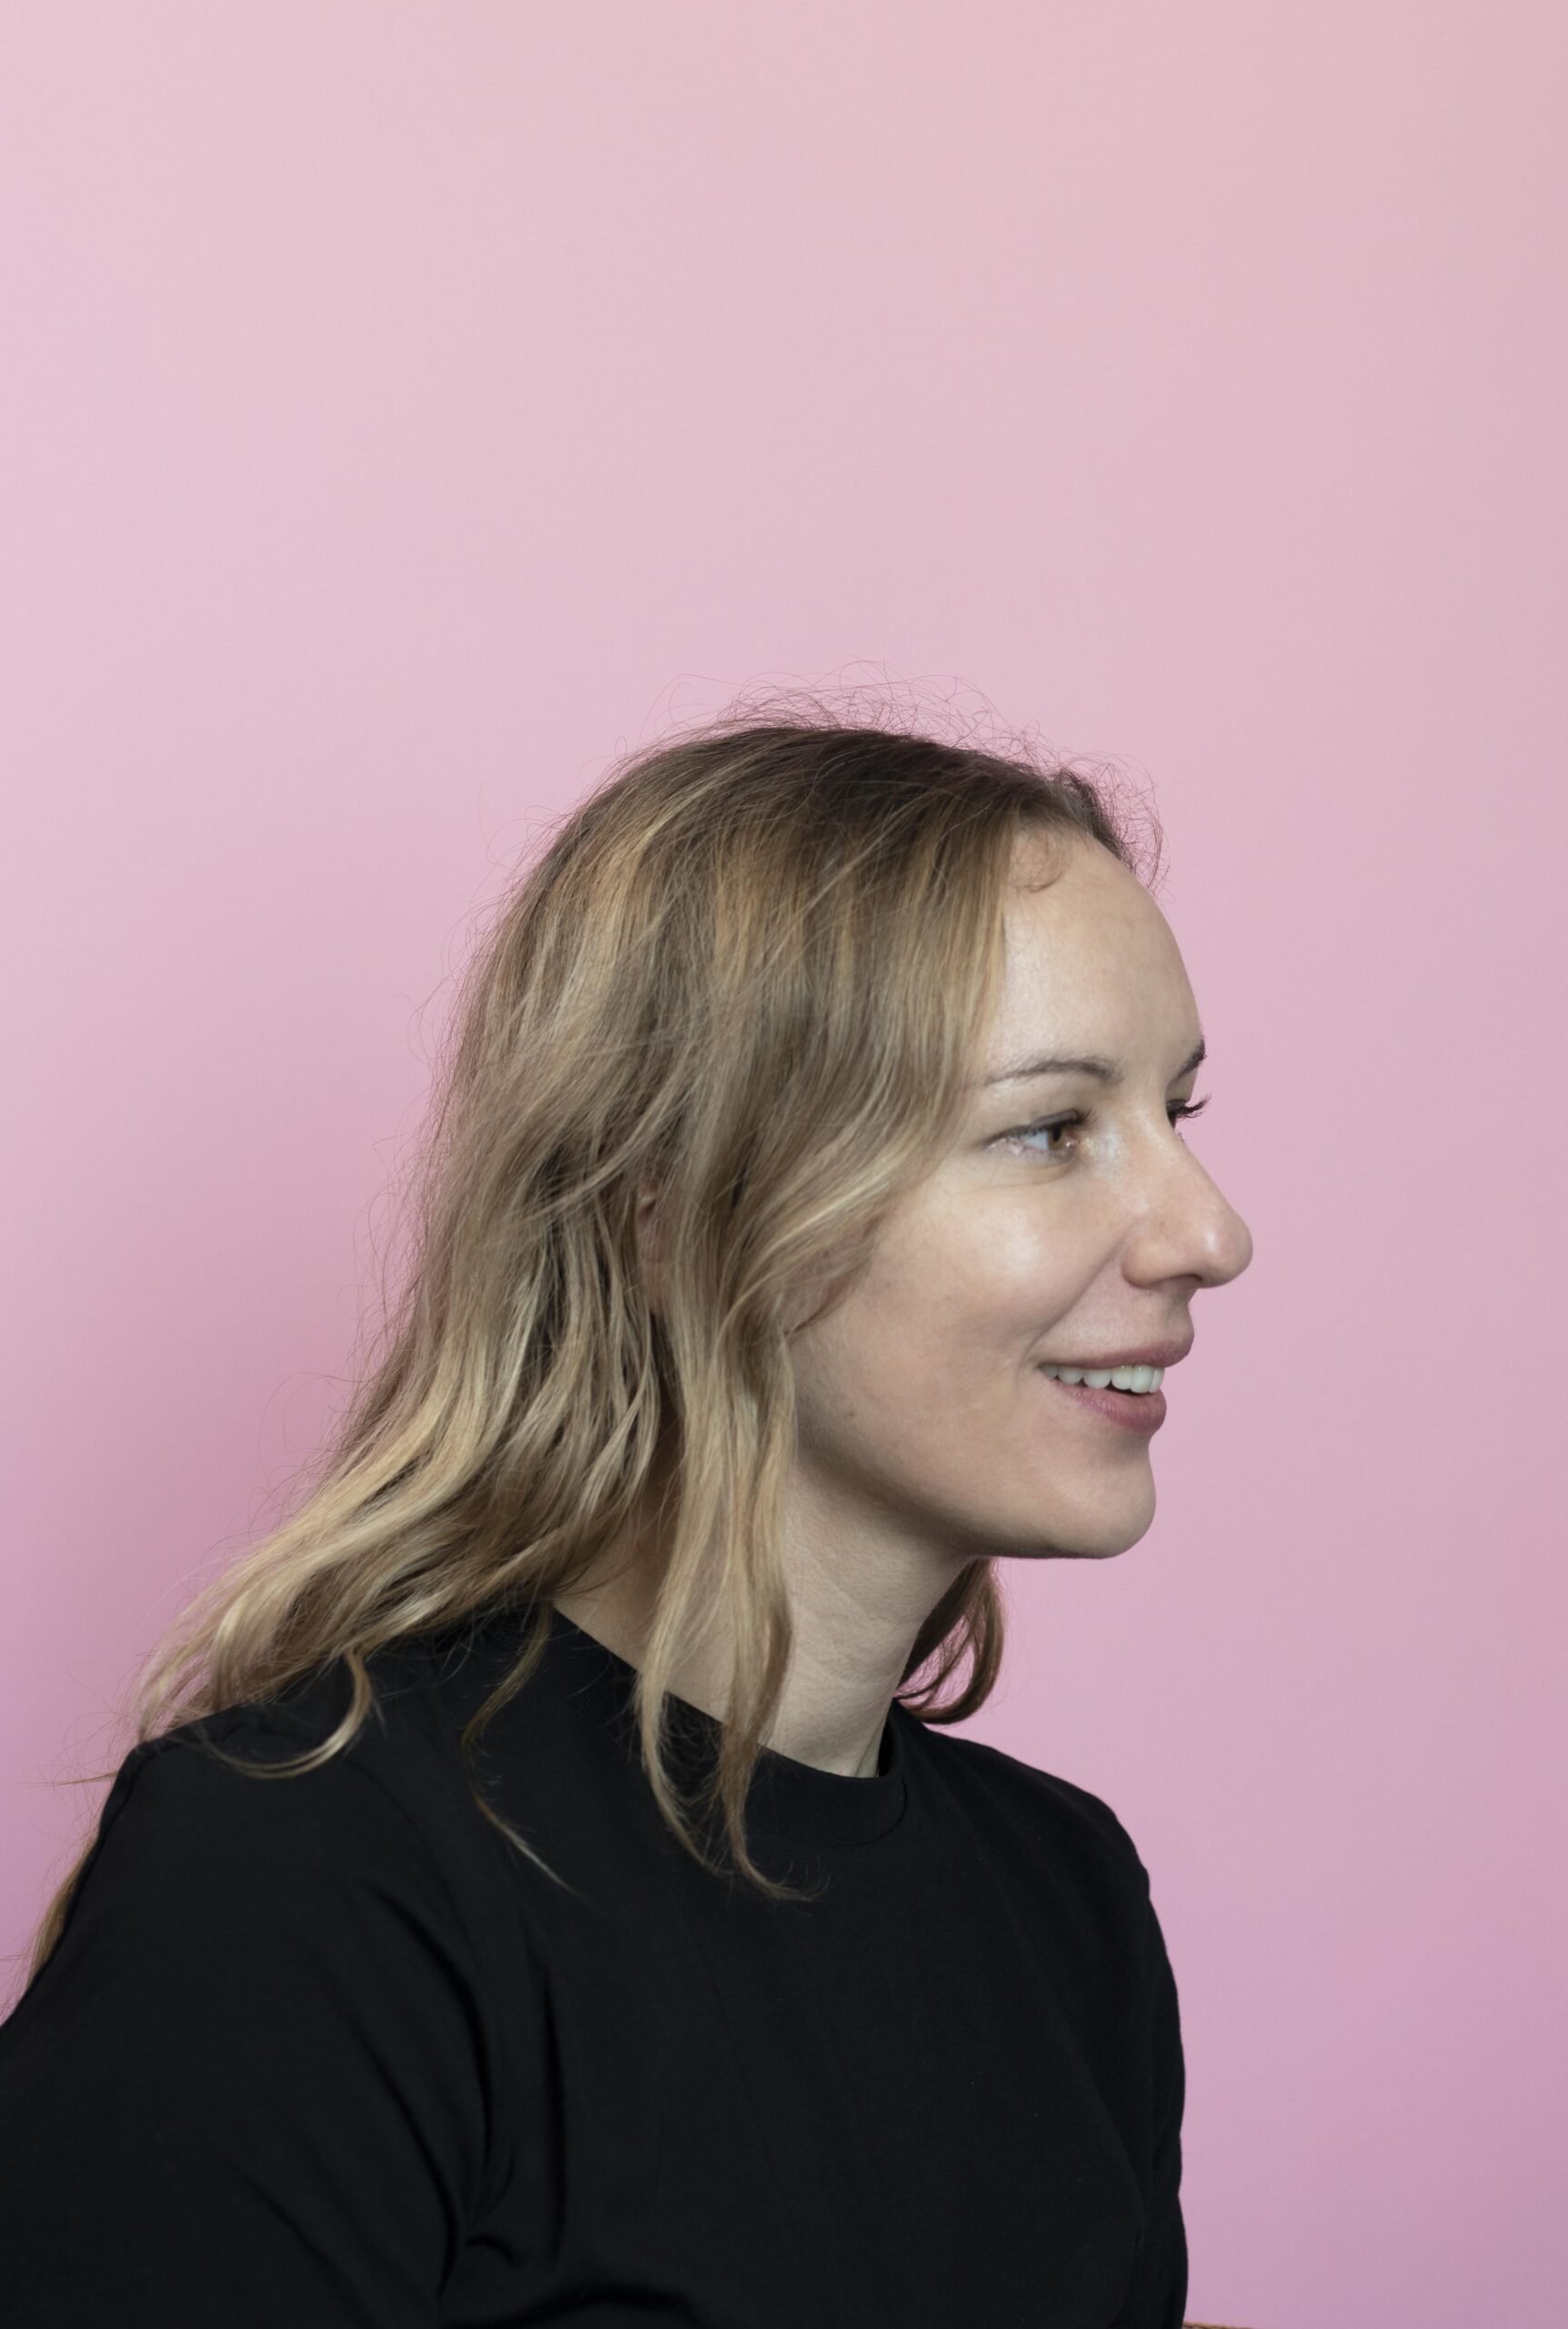 This is a portrait photo of Zofia nierodzińska, who is a female person, shown from her shoulders to the top of her head. She is wearing a black t-shirt. She has blonde, long hair. She is in her early thirties. The background is in a plain light pink colour.